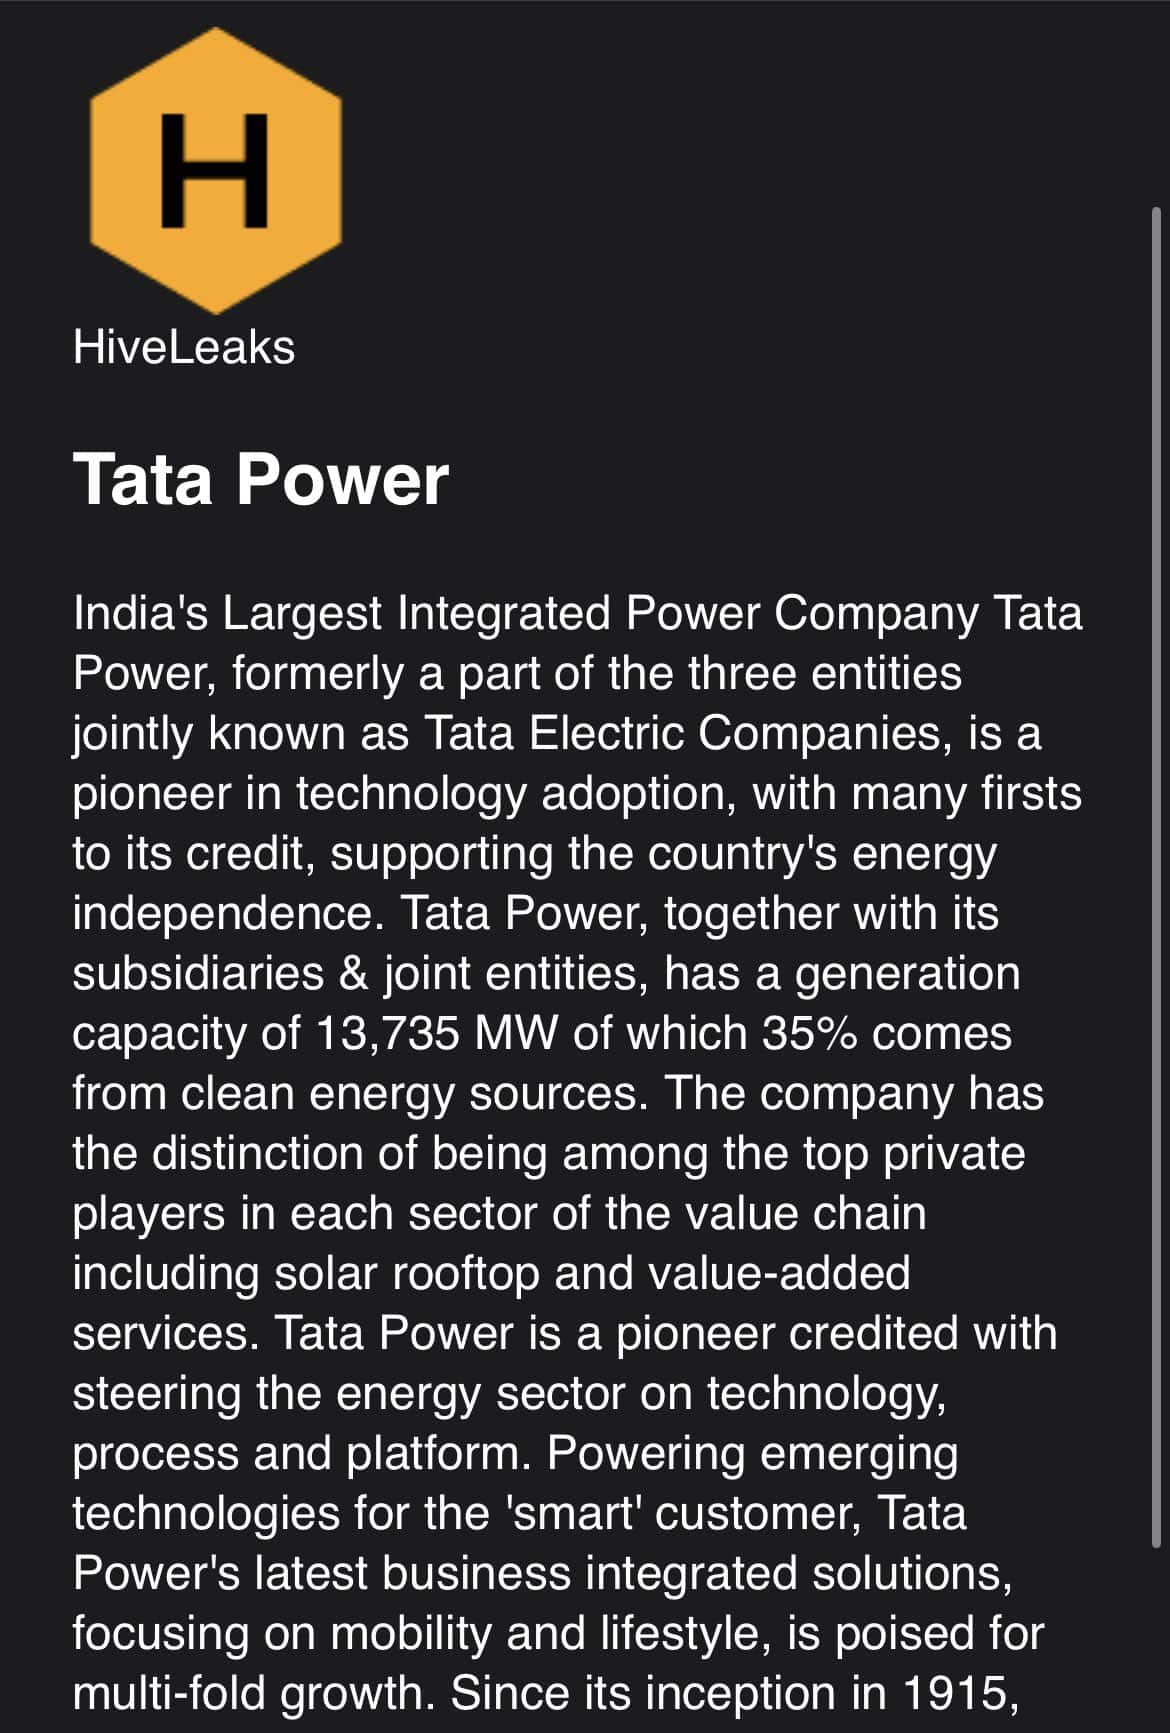 Hive ransomware leaks data allegedly stolen from Tata Power